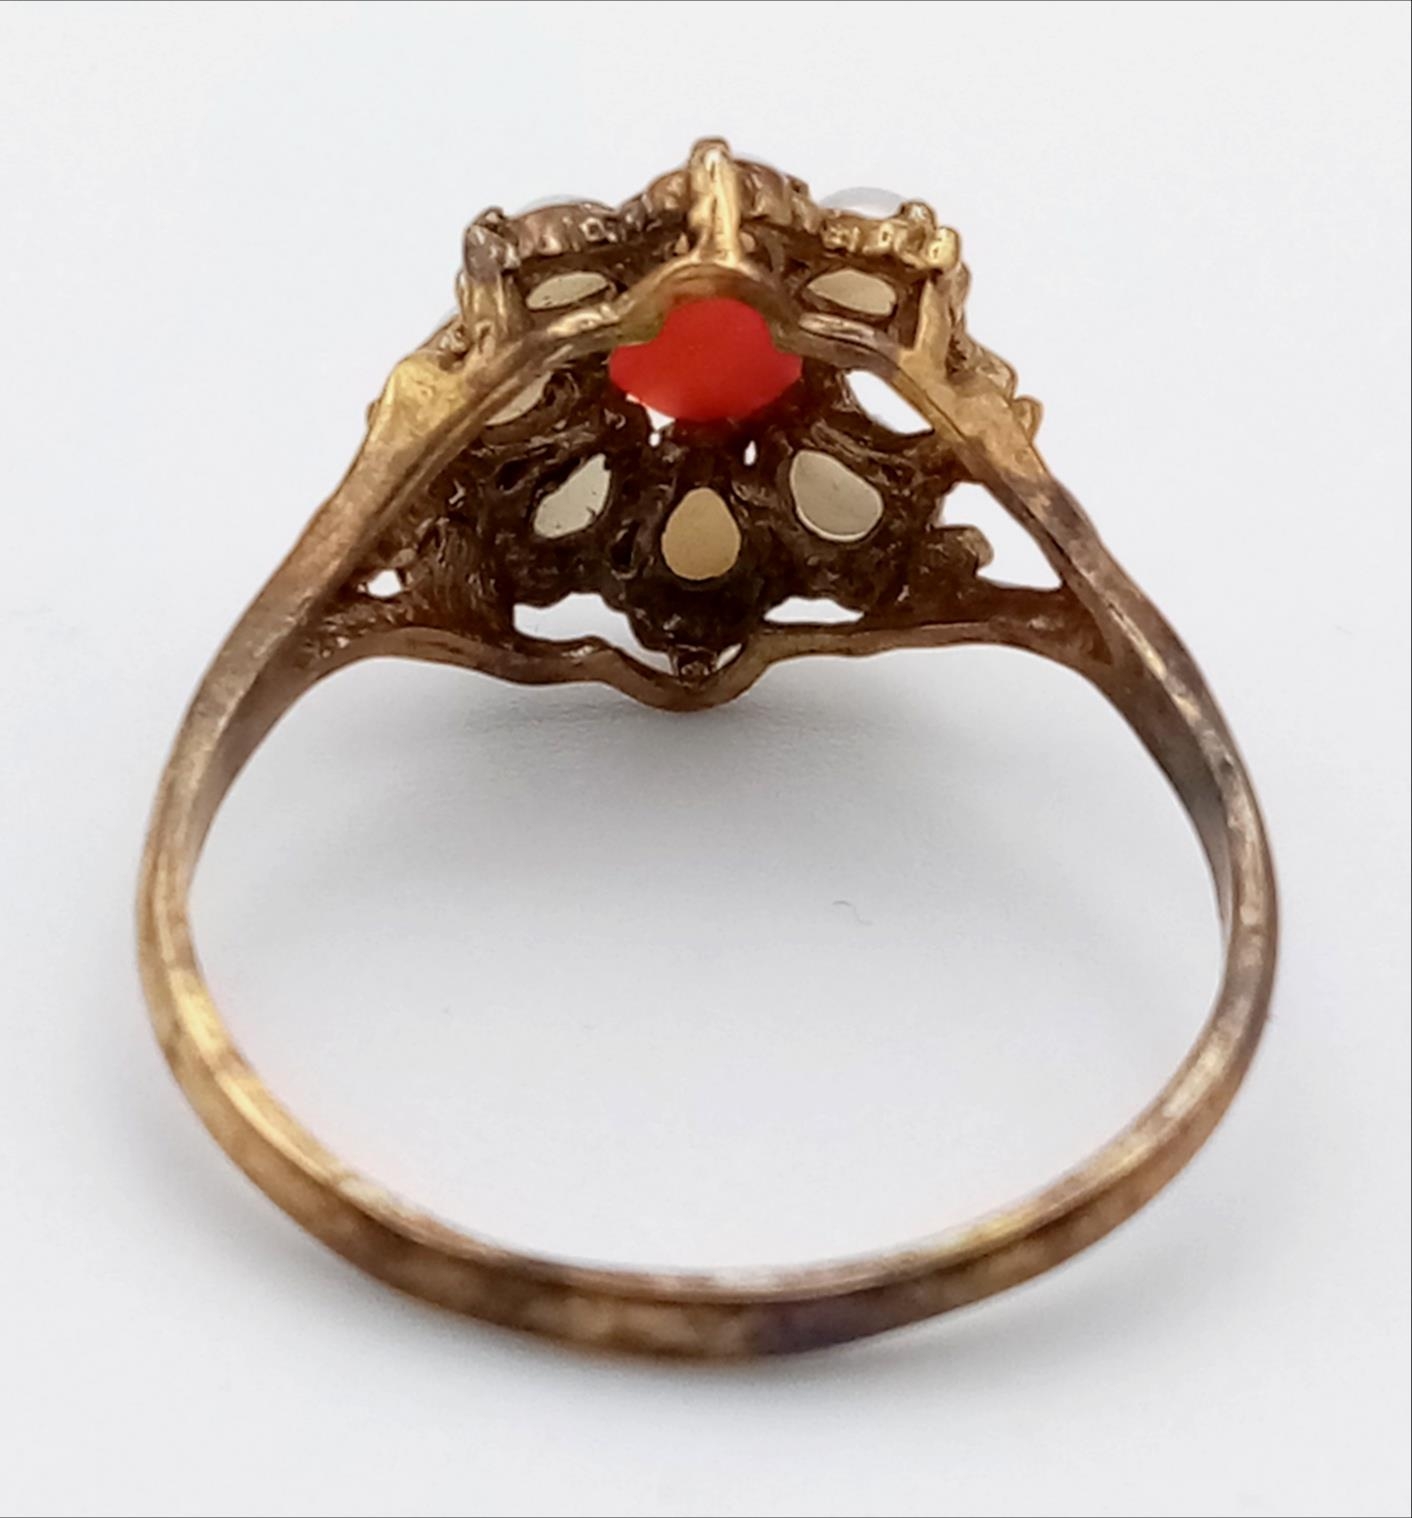 A 9K Gold Vintage Seed Pearl and Coral Ring. Missing a seed pearl so a/f. Size O. 2g total weight. - Image 3 of 5